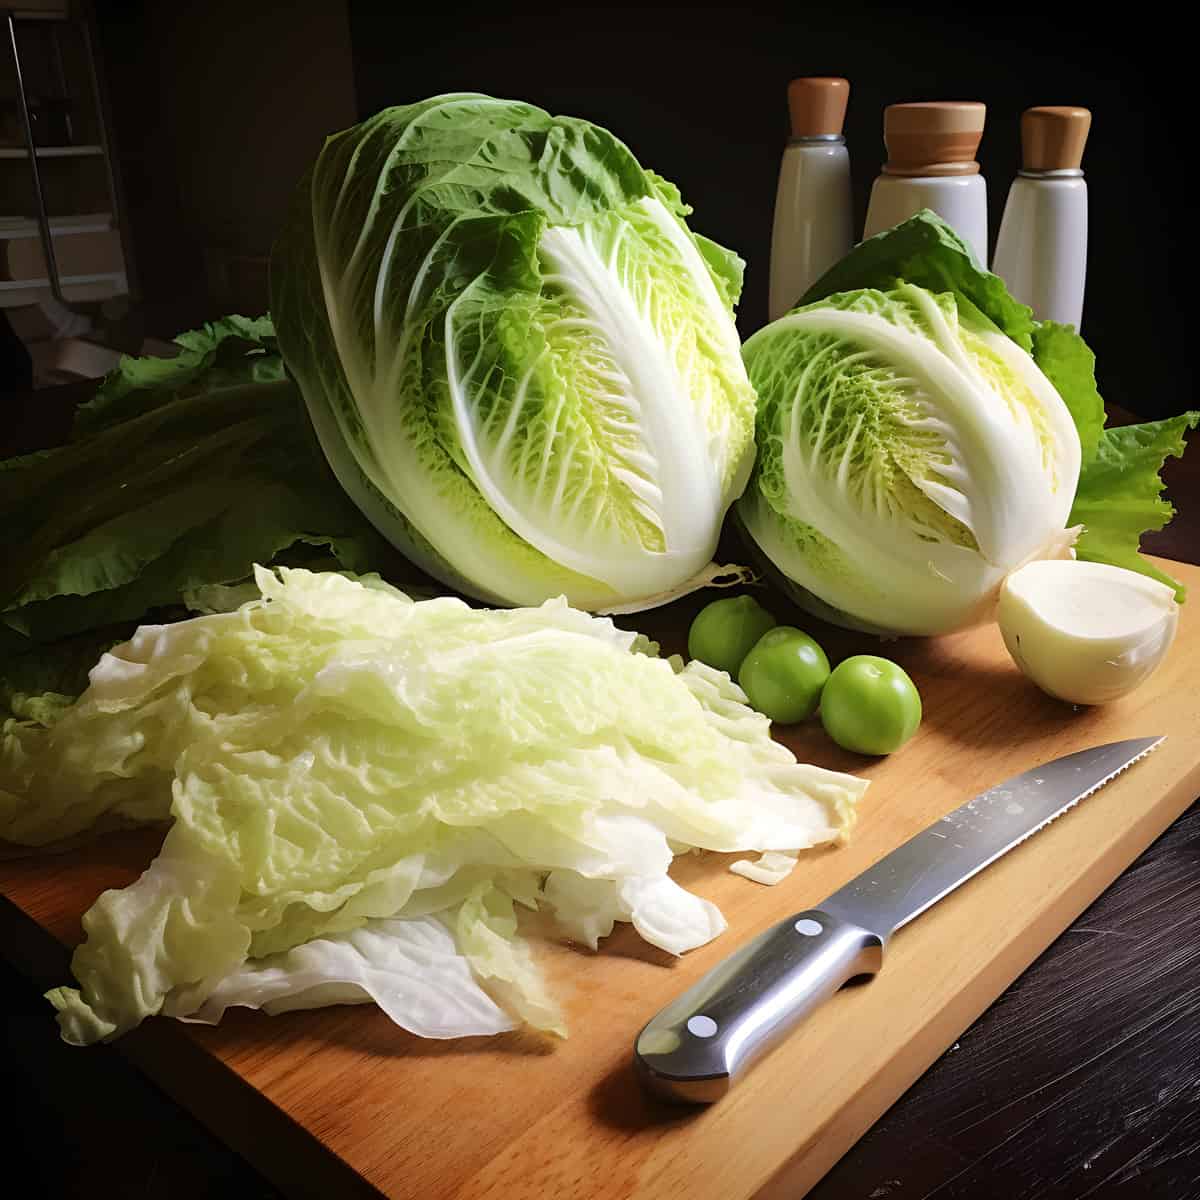 Napa Cabbage on a kitchen counter